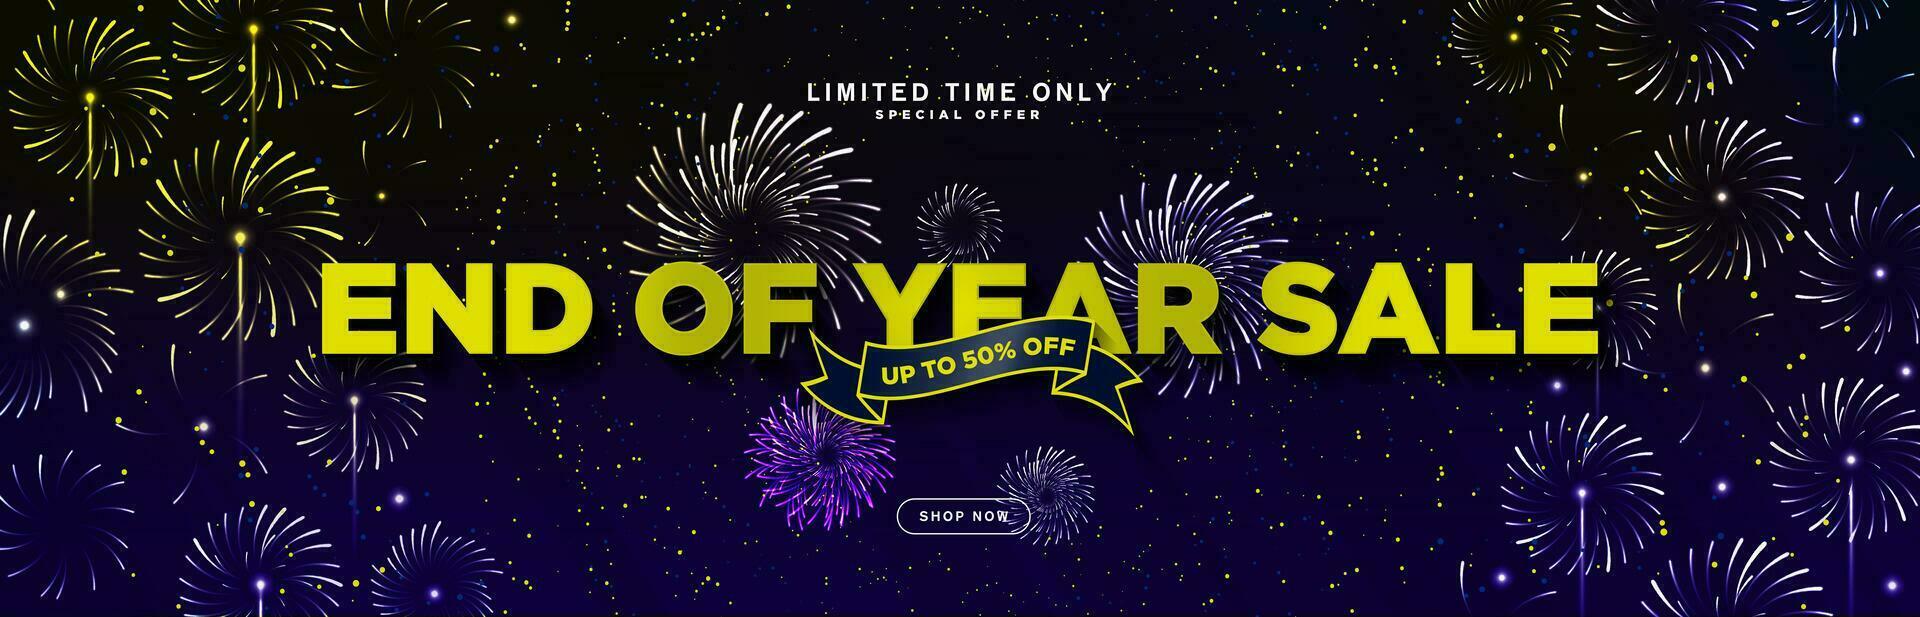 End of Year Sale Typographic Text Sales Banner with up to 50 off discount tag and shop now CTA button on dark background with fireworks. Editable Vector Illustration. EPS 10.